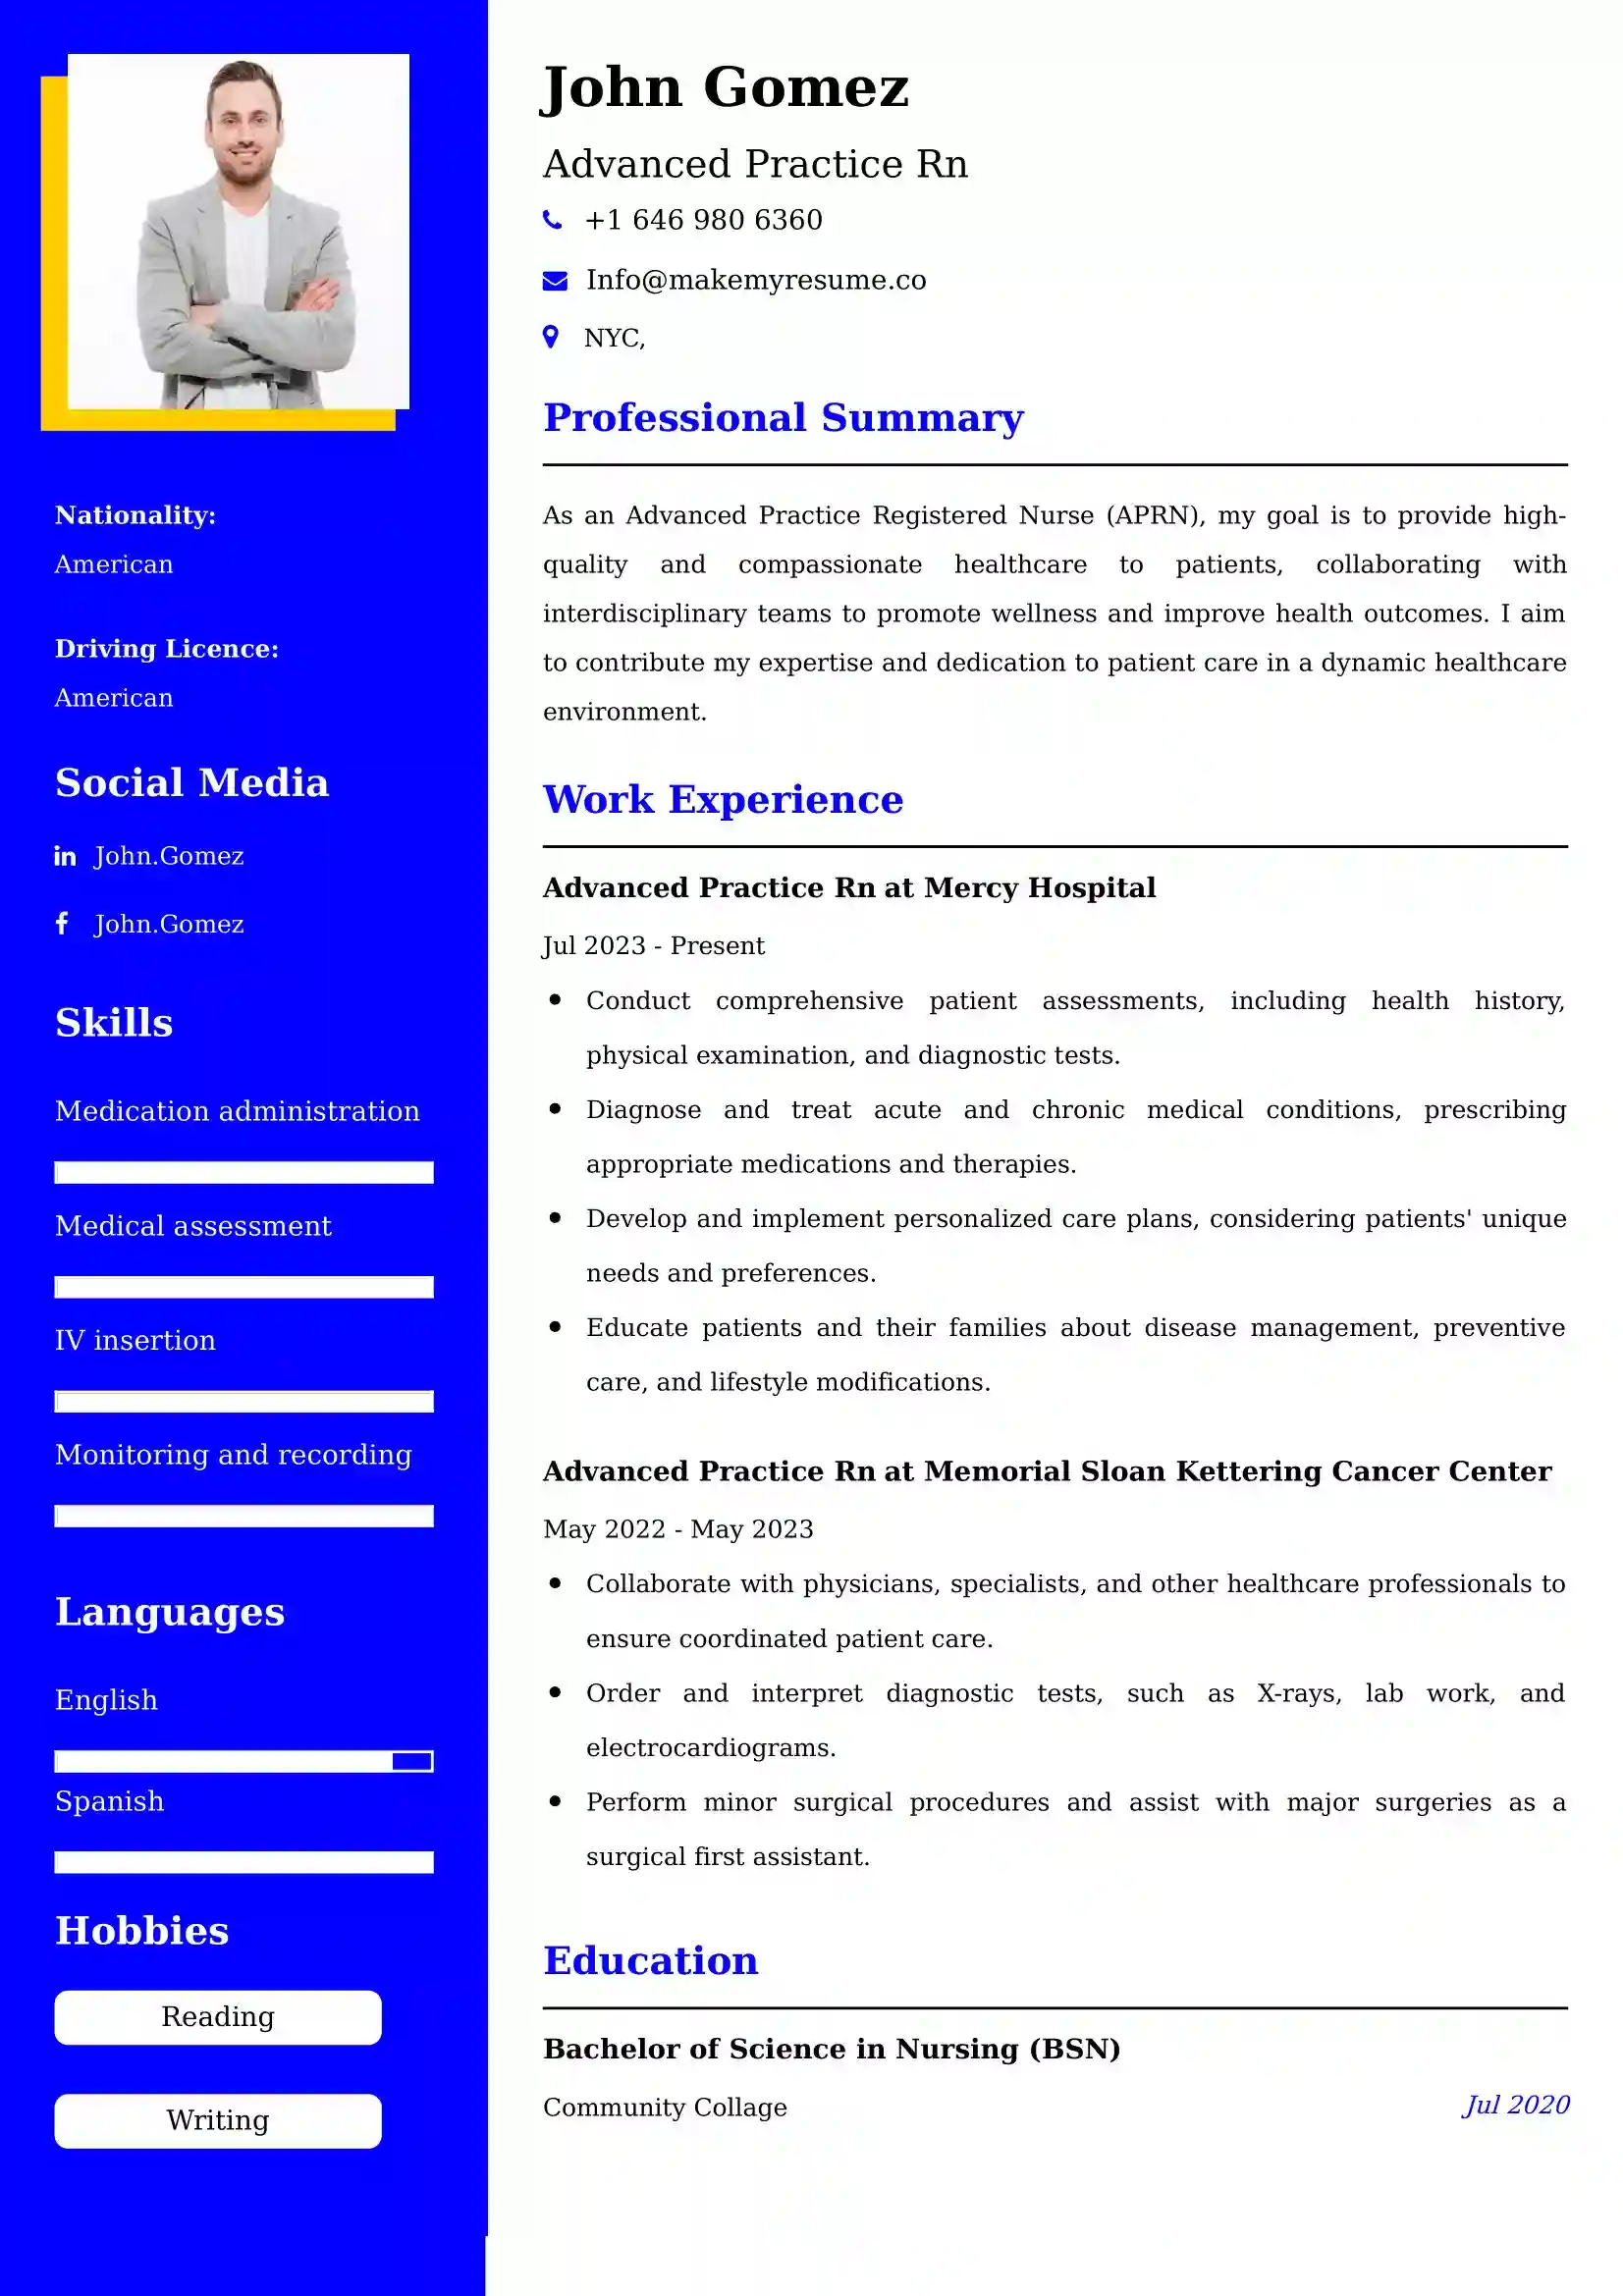 Advanced Practice Rn Resume Examples - Brazilian Format, Latest Template